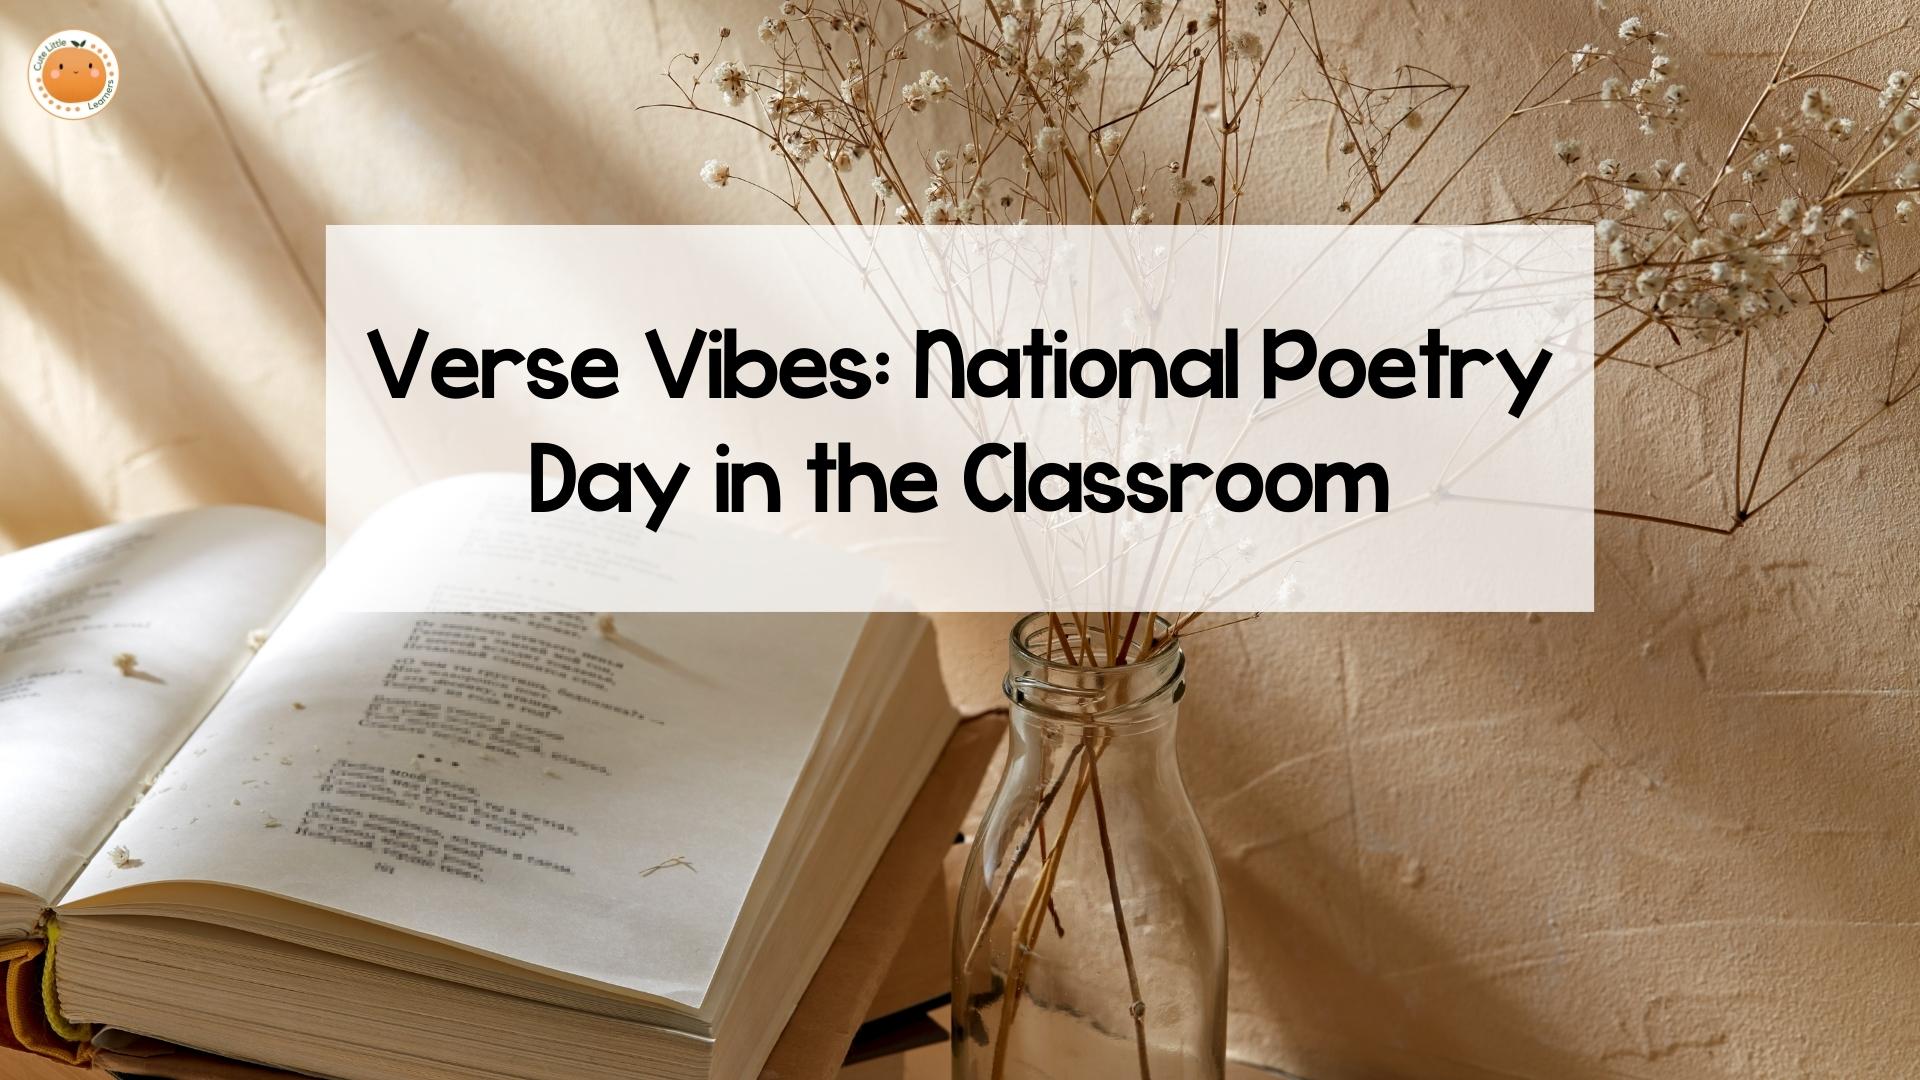 Verse Vibes: Embracing National Poetry Day in the Classroom